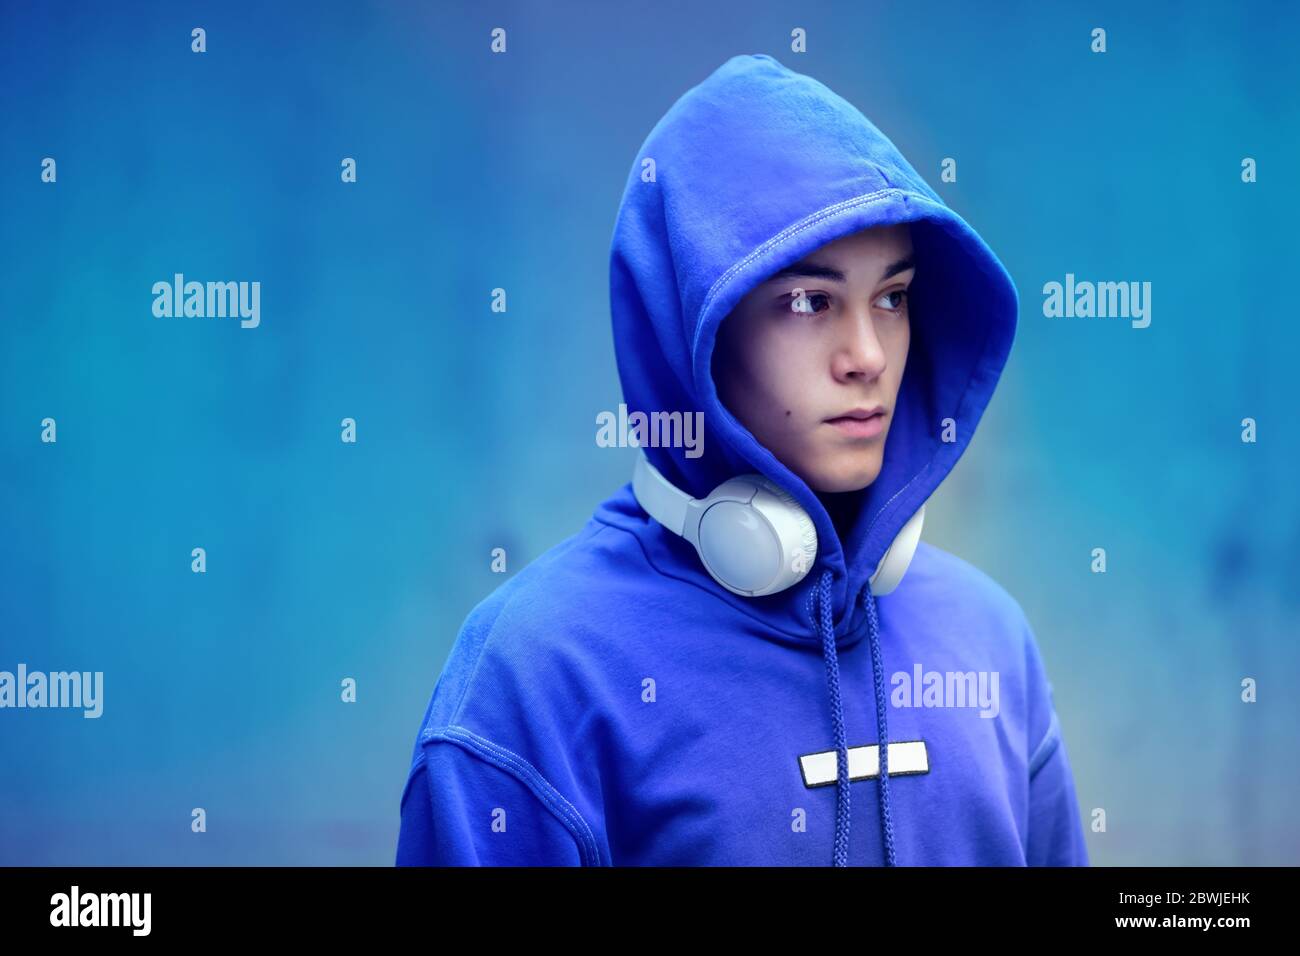 Young man wearing a hoodie with earphones around his neck looking off to the side with a serious thoughtful expression Stock Photo